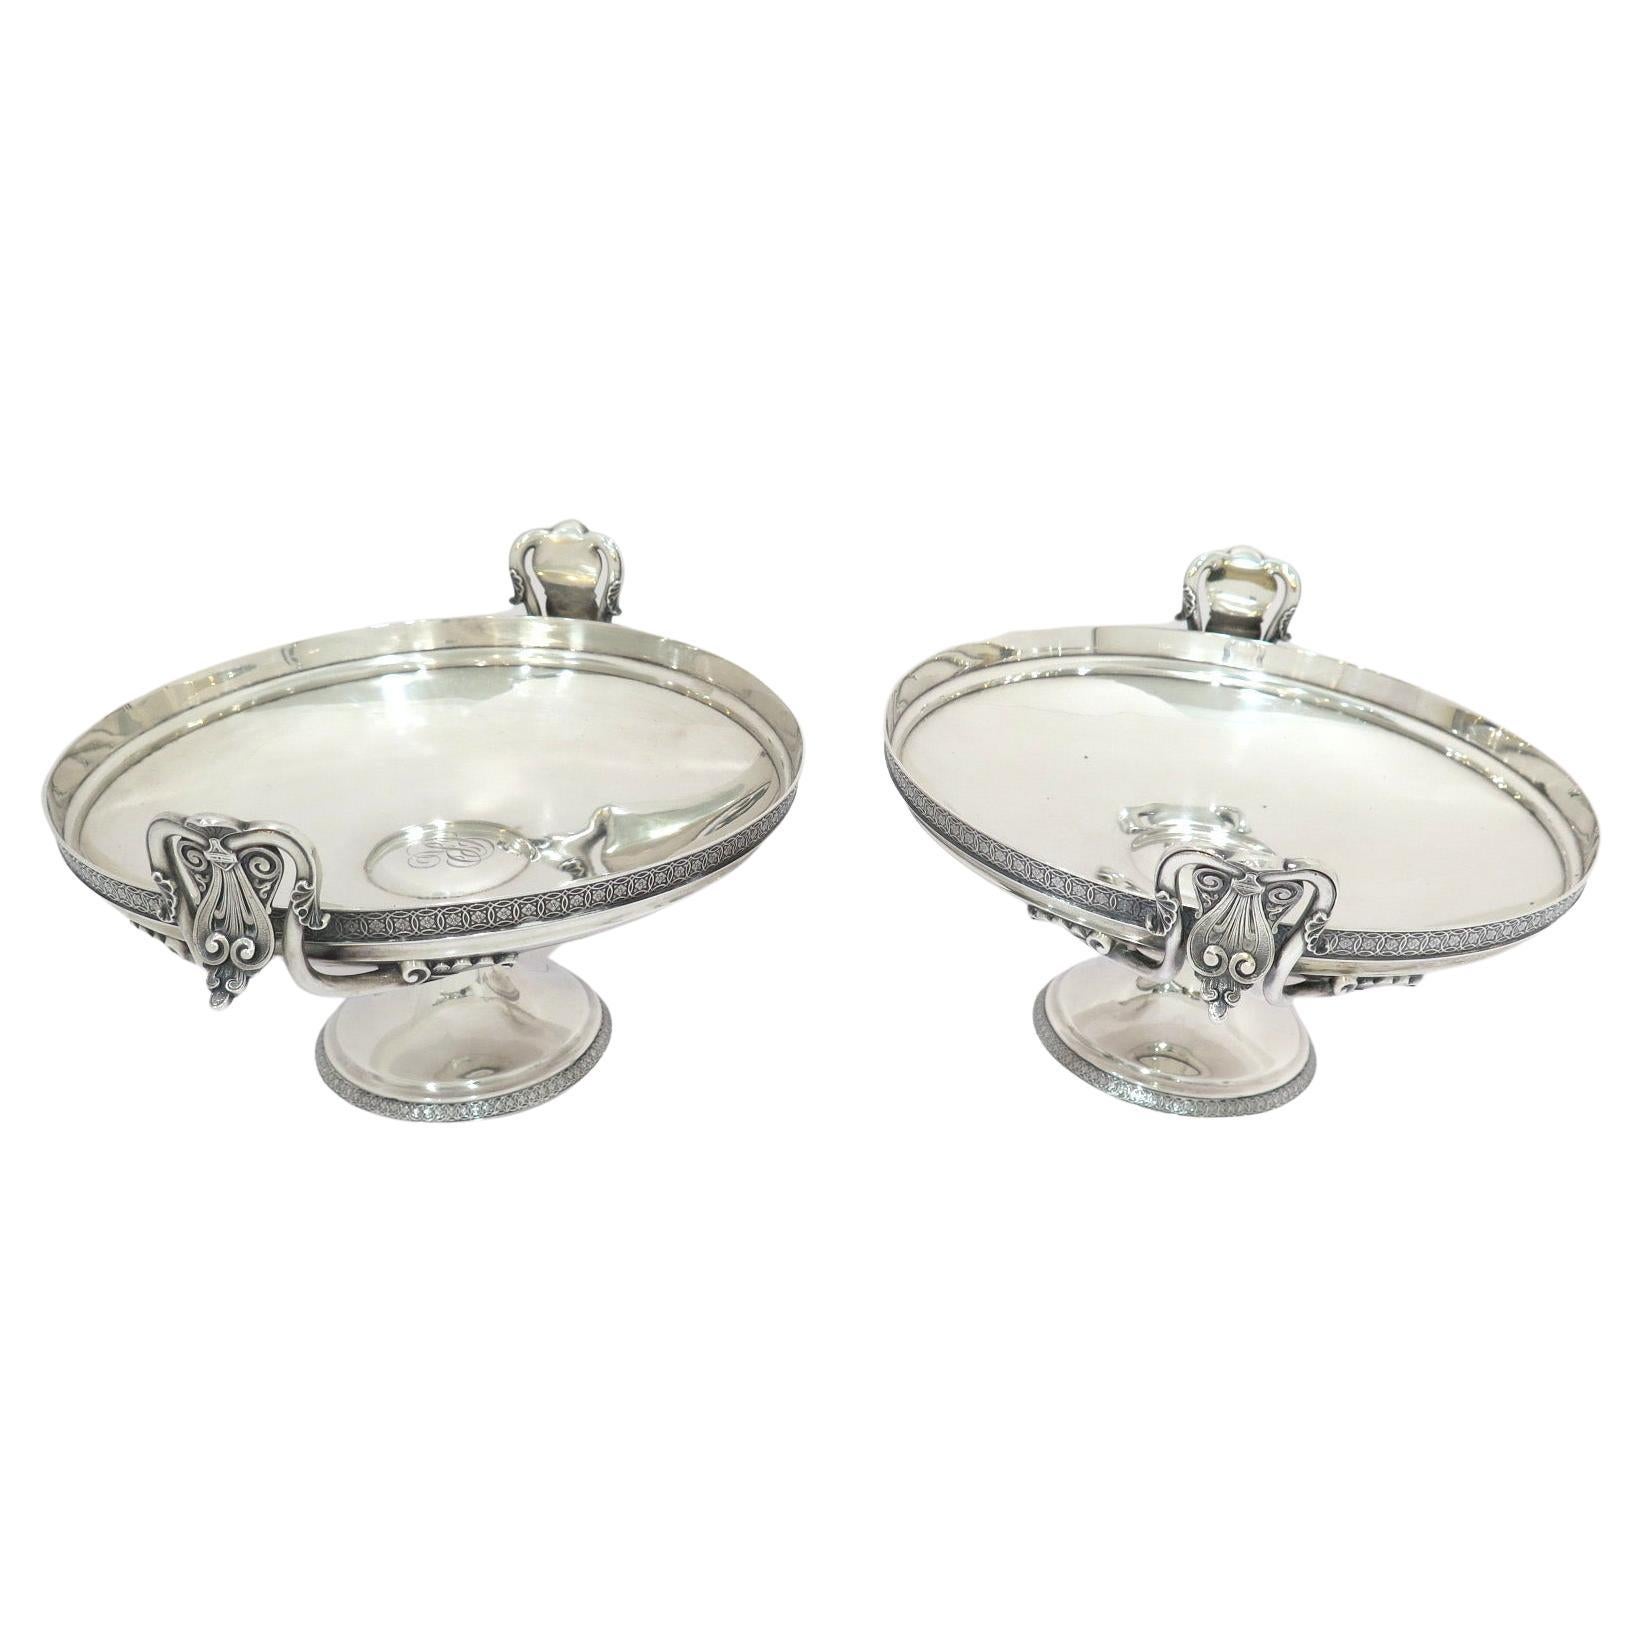 Two Sterling Silver Tiffany & Co Antique Ornate Handles Footed Serving Bowls